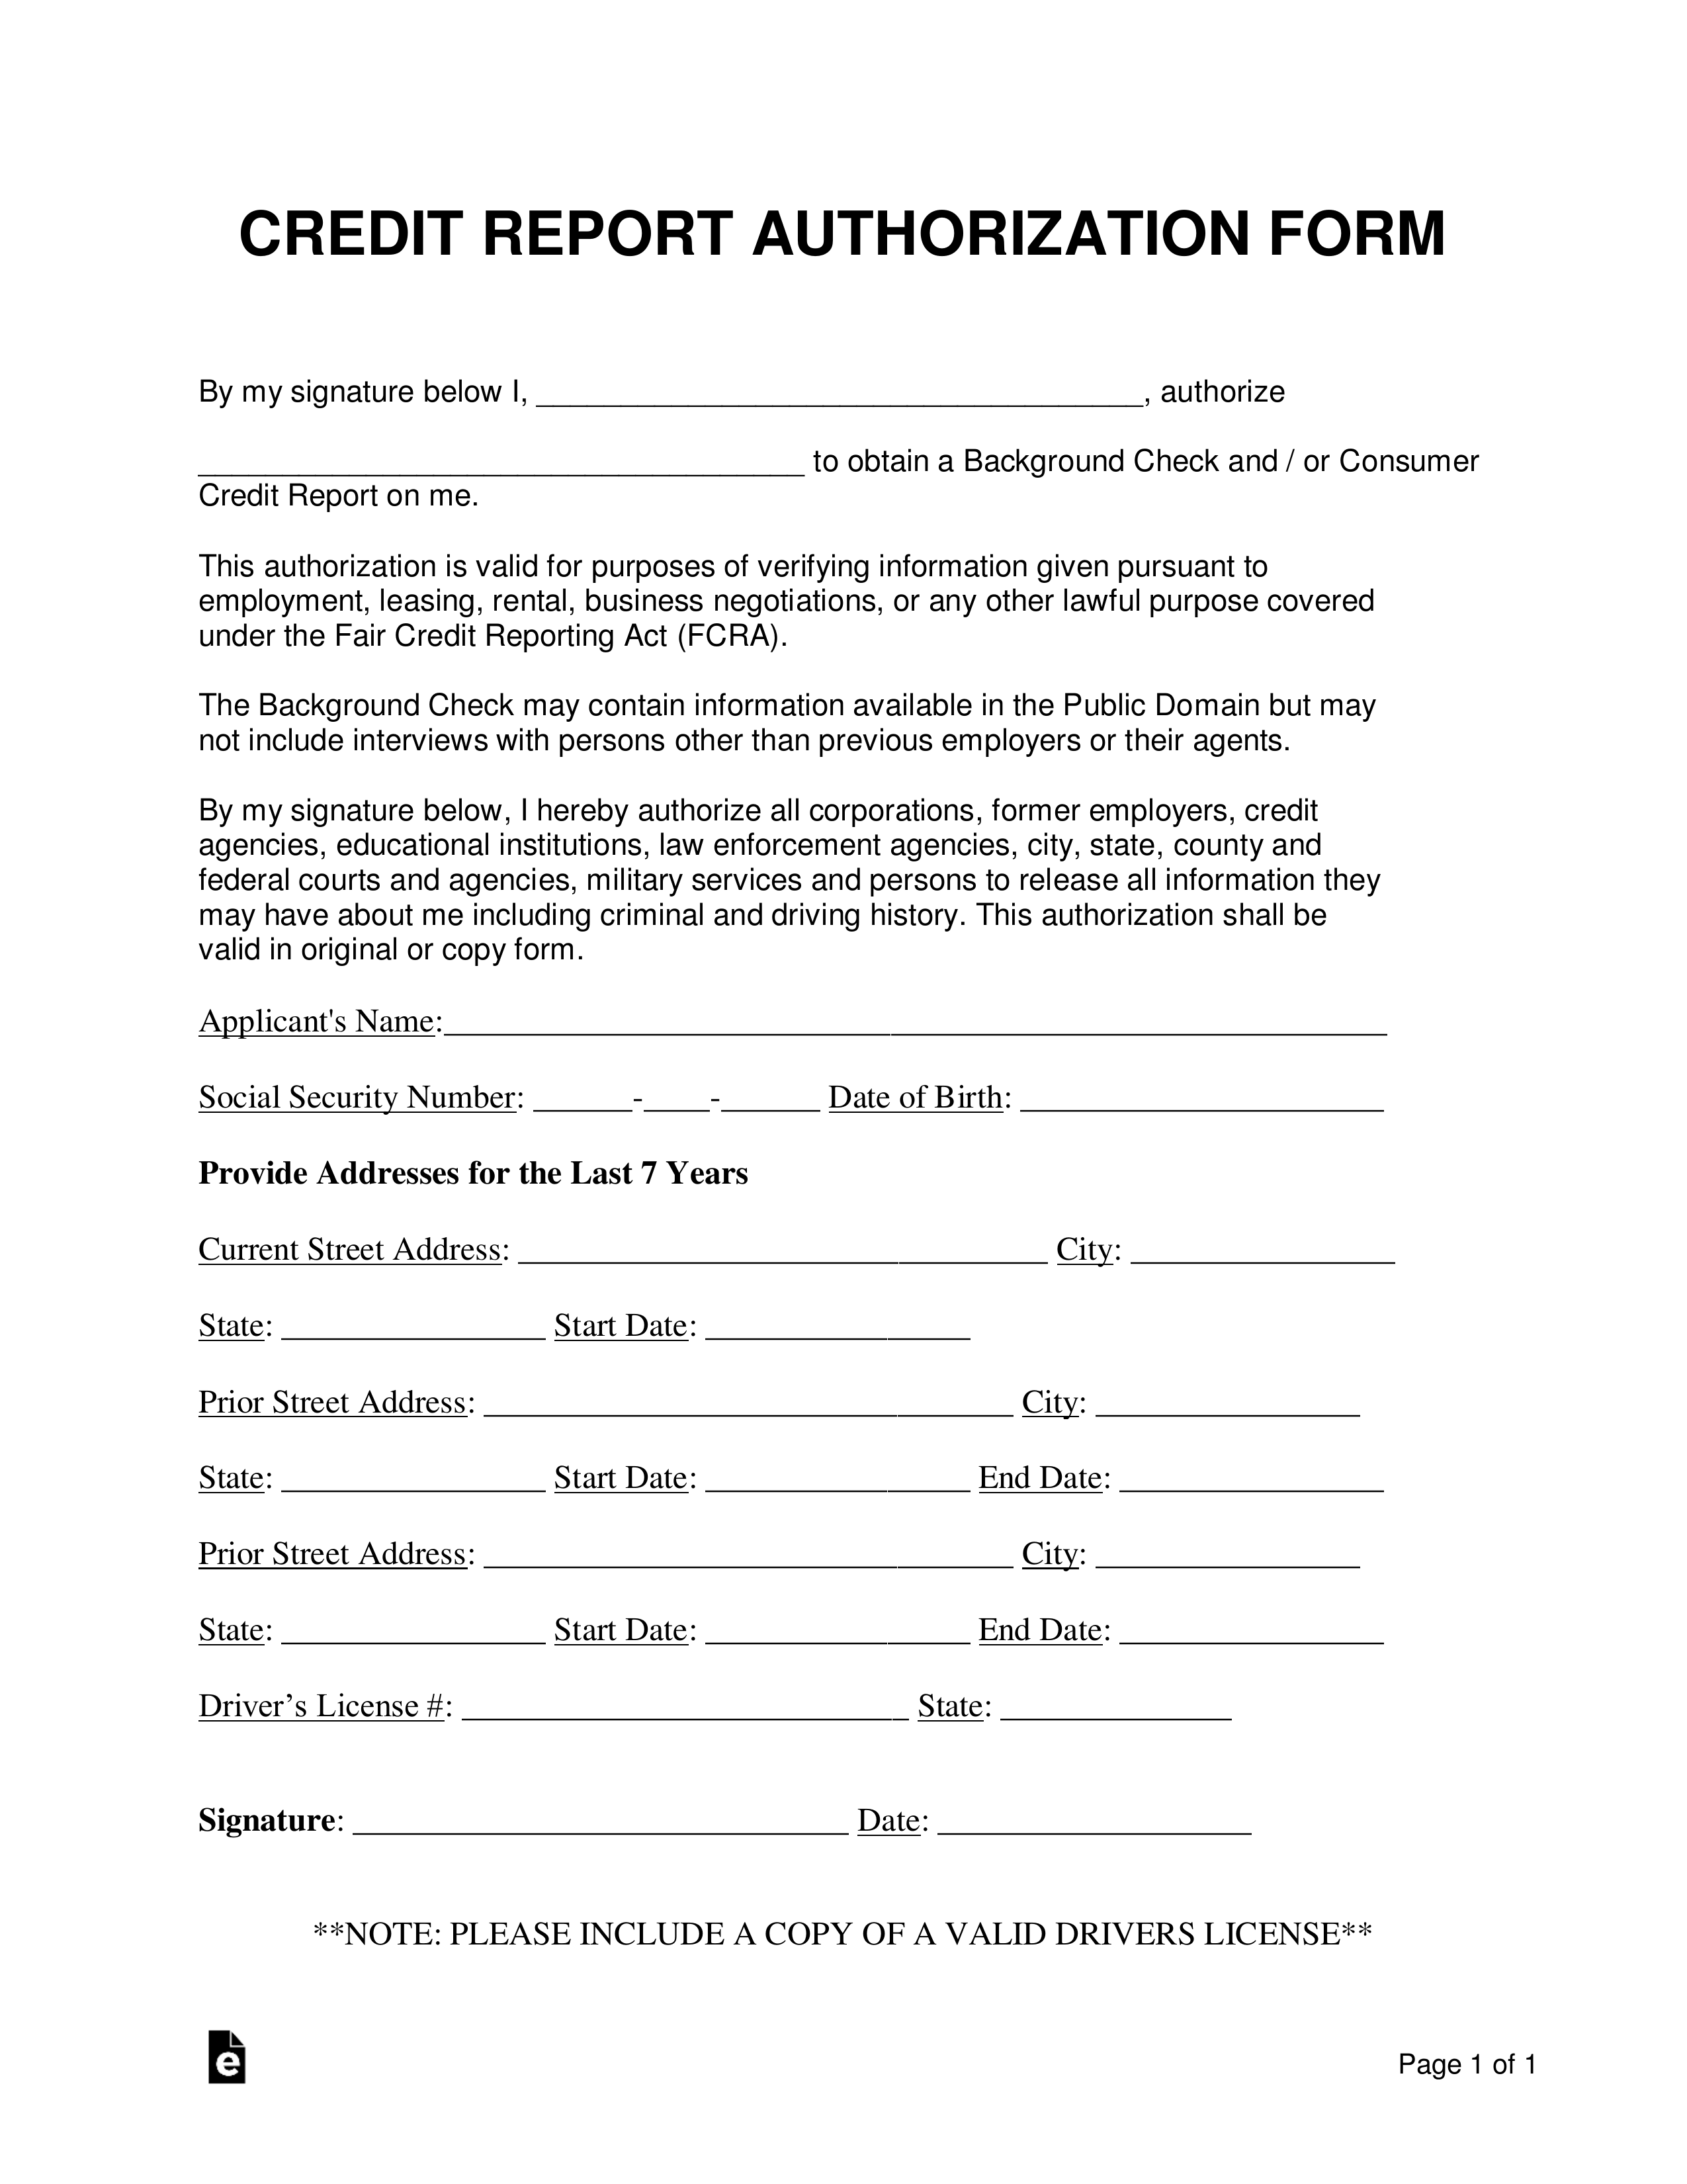 Credit Report Authorization (Consent) Form